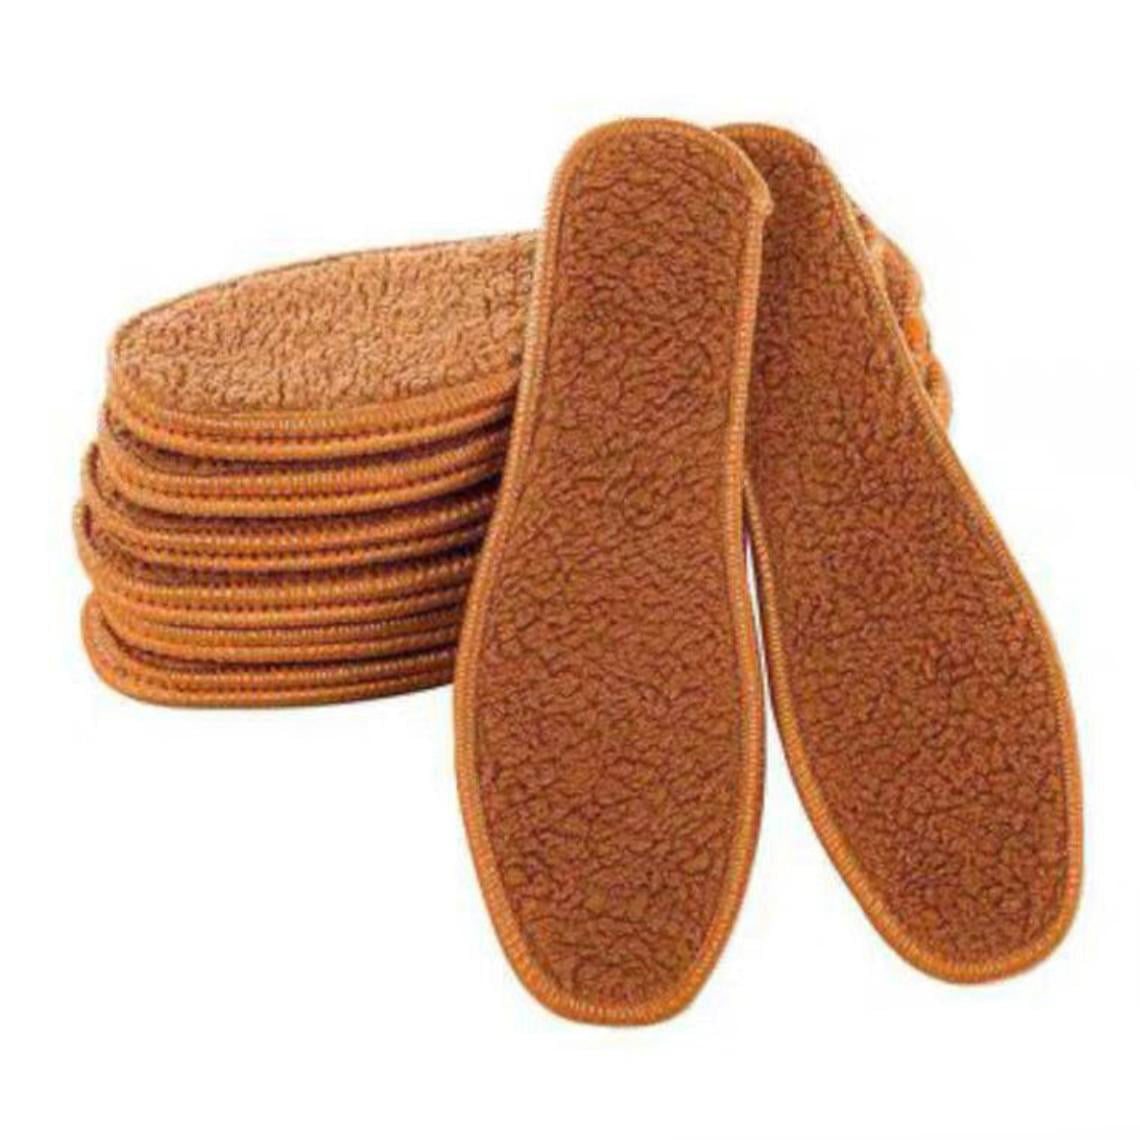 2 PAIR PACK FLEECE THERMAL EXTRA FRESH COMFORT INSOLES SHOE CARE BOOT INSIDE PAD 